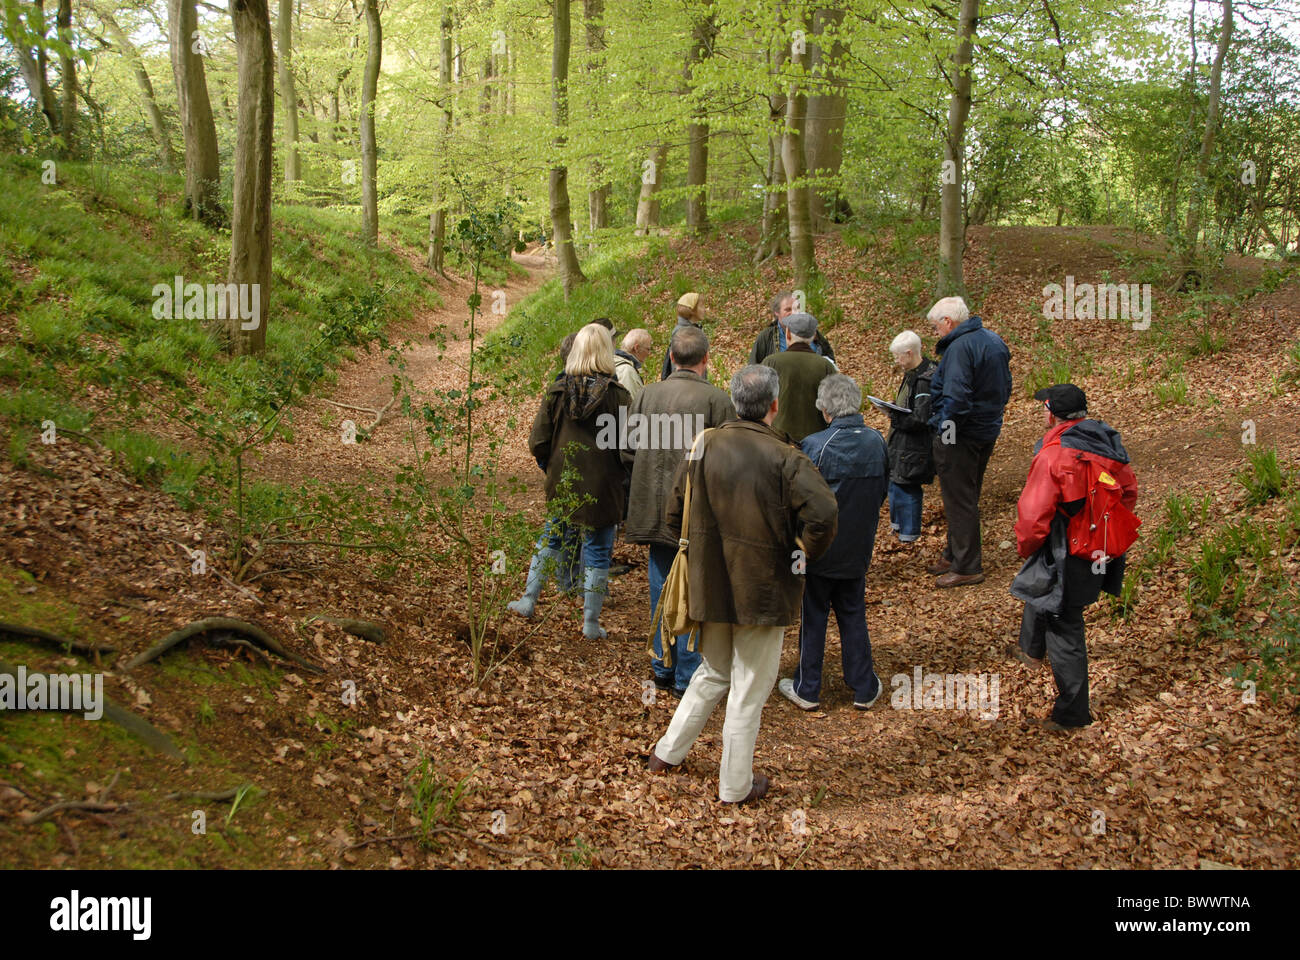 Guided archaeological group examining remains of Iron Age hillfort, Cholesbury Common, Chilterns, Buckinghamshire, England, Stock Photo